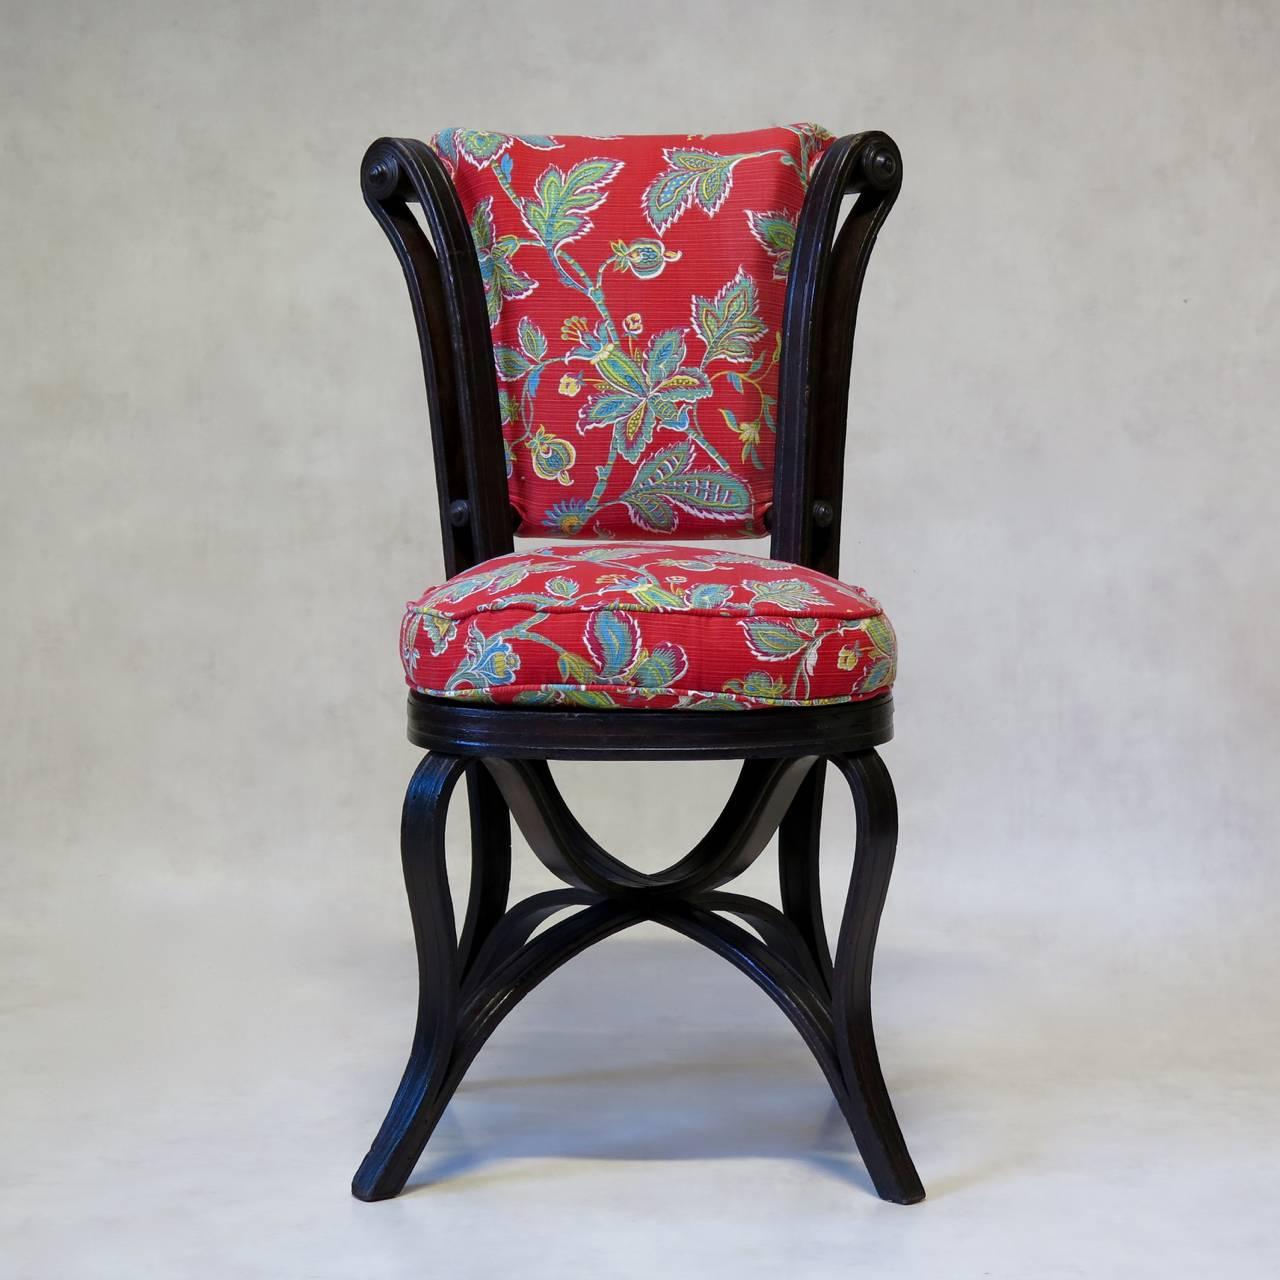 Rare and charming pair of antique bentwood chairs, possibly by Thonet. 
The design of the chair is ingenious and creates a lovely, fluid movement: the chair is made so that one piece of bentwood runs up from the front foot, crosses over, up and